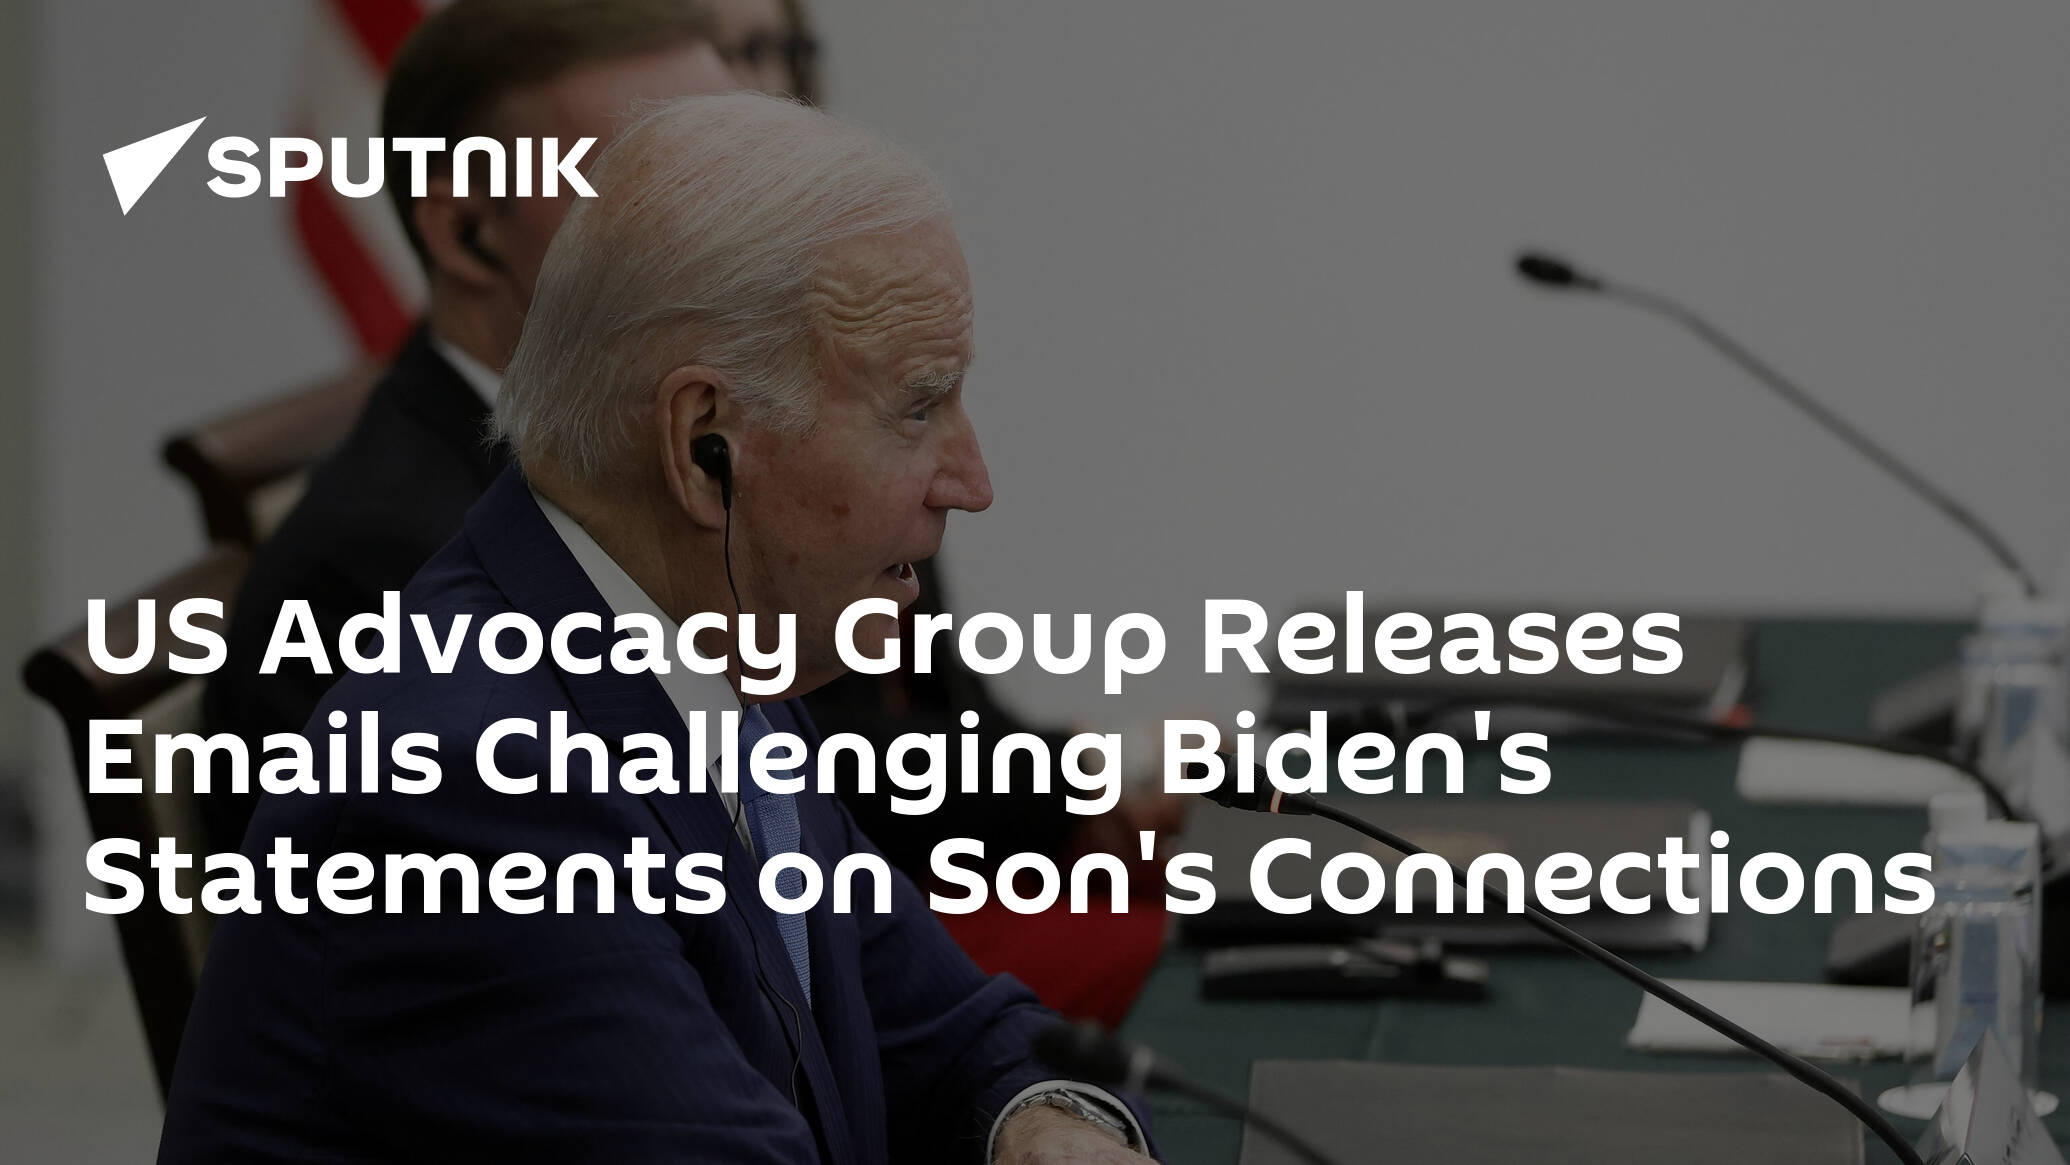 US Advocacy Group Releases Emails Challenging Biden's Statements on Son's Connections